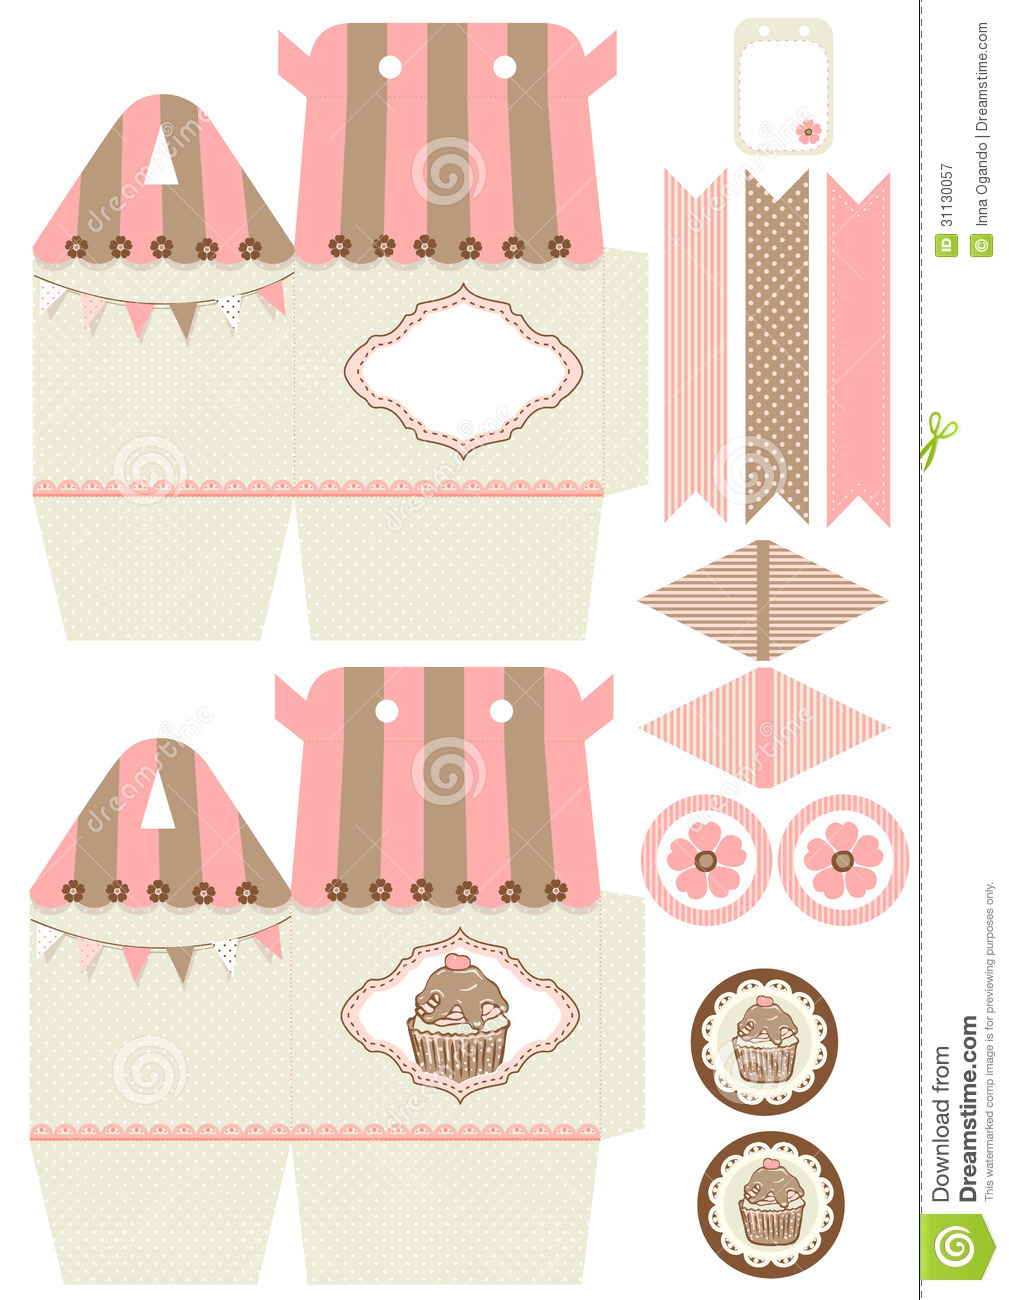 7-best-images-of-cupcake-box-printable-template-cupcakes-boxes